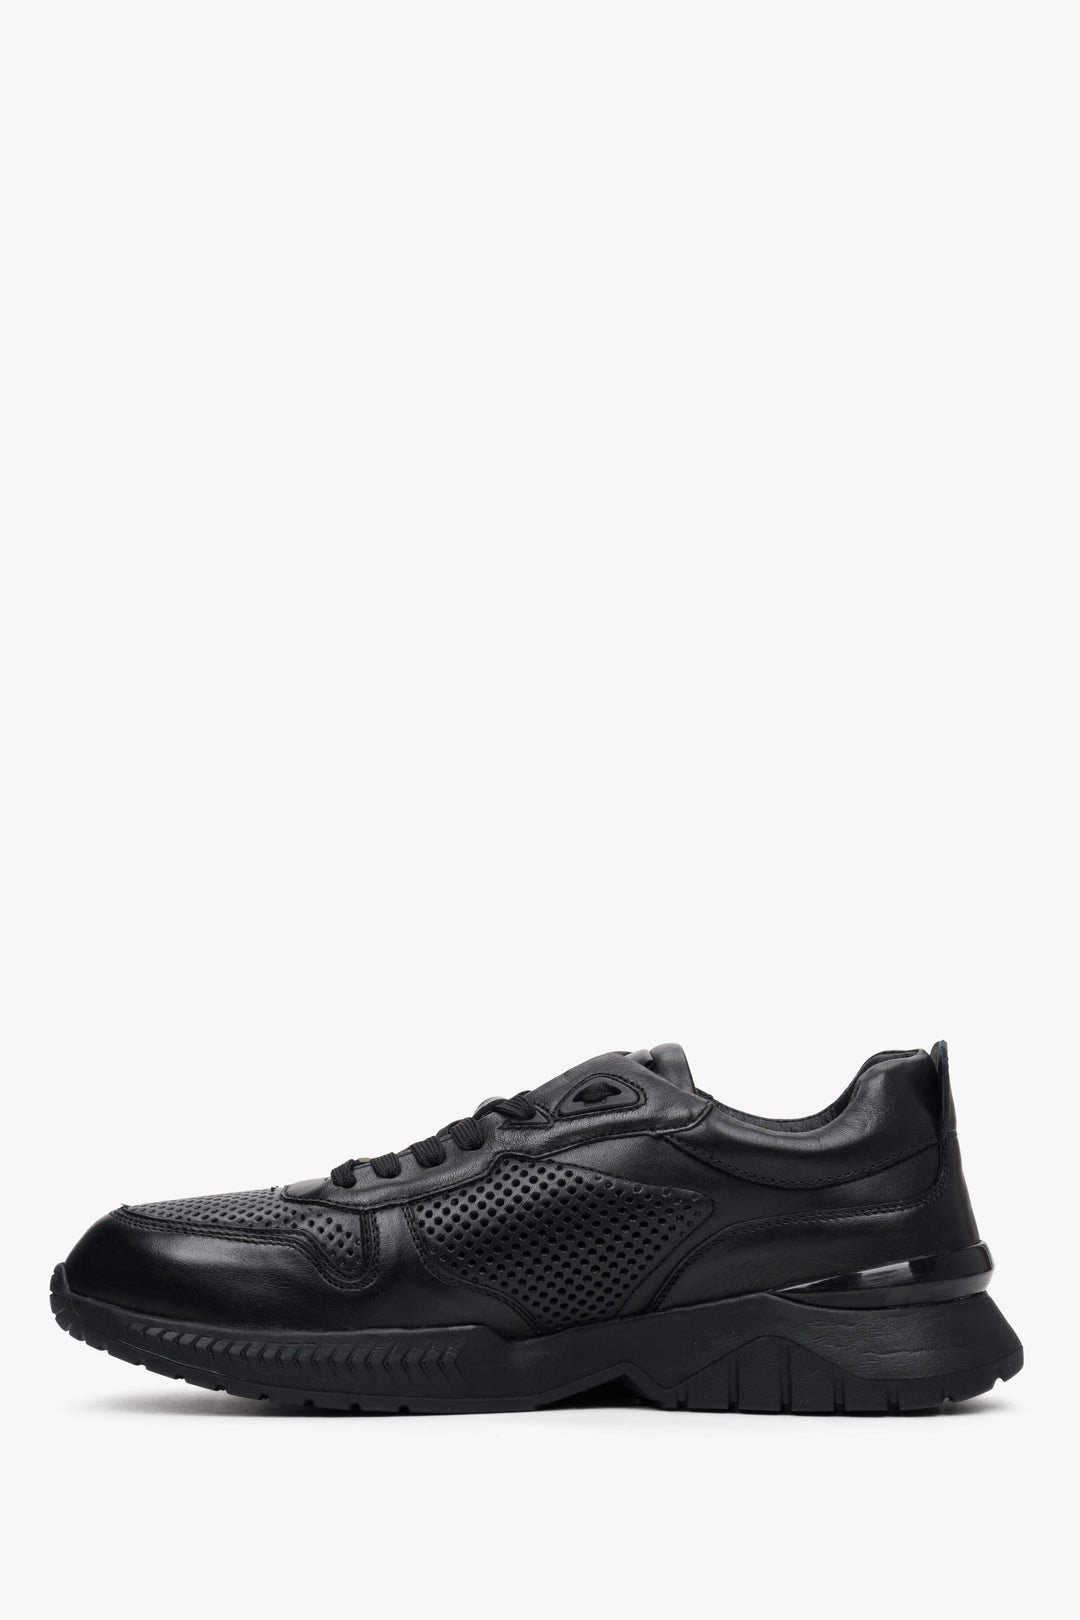 Men's black leather sneakers with perforations for summer.